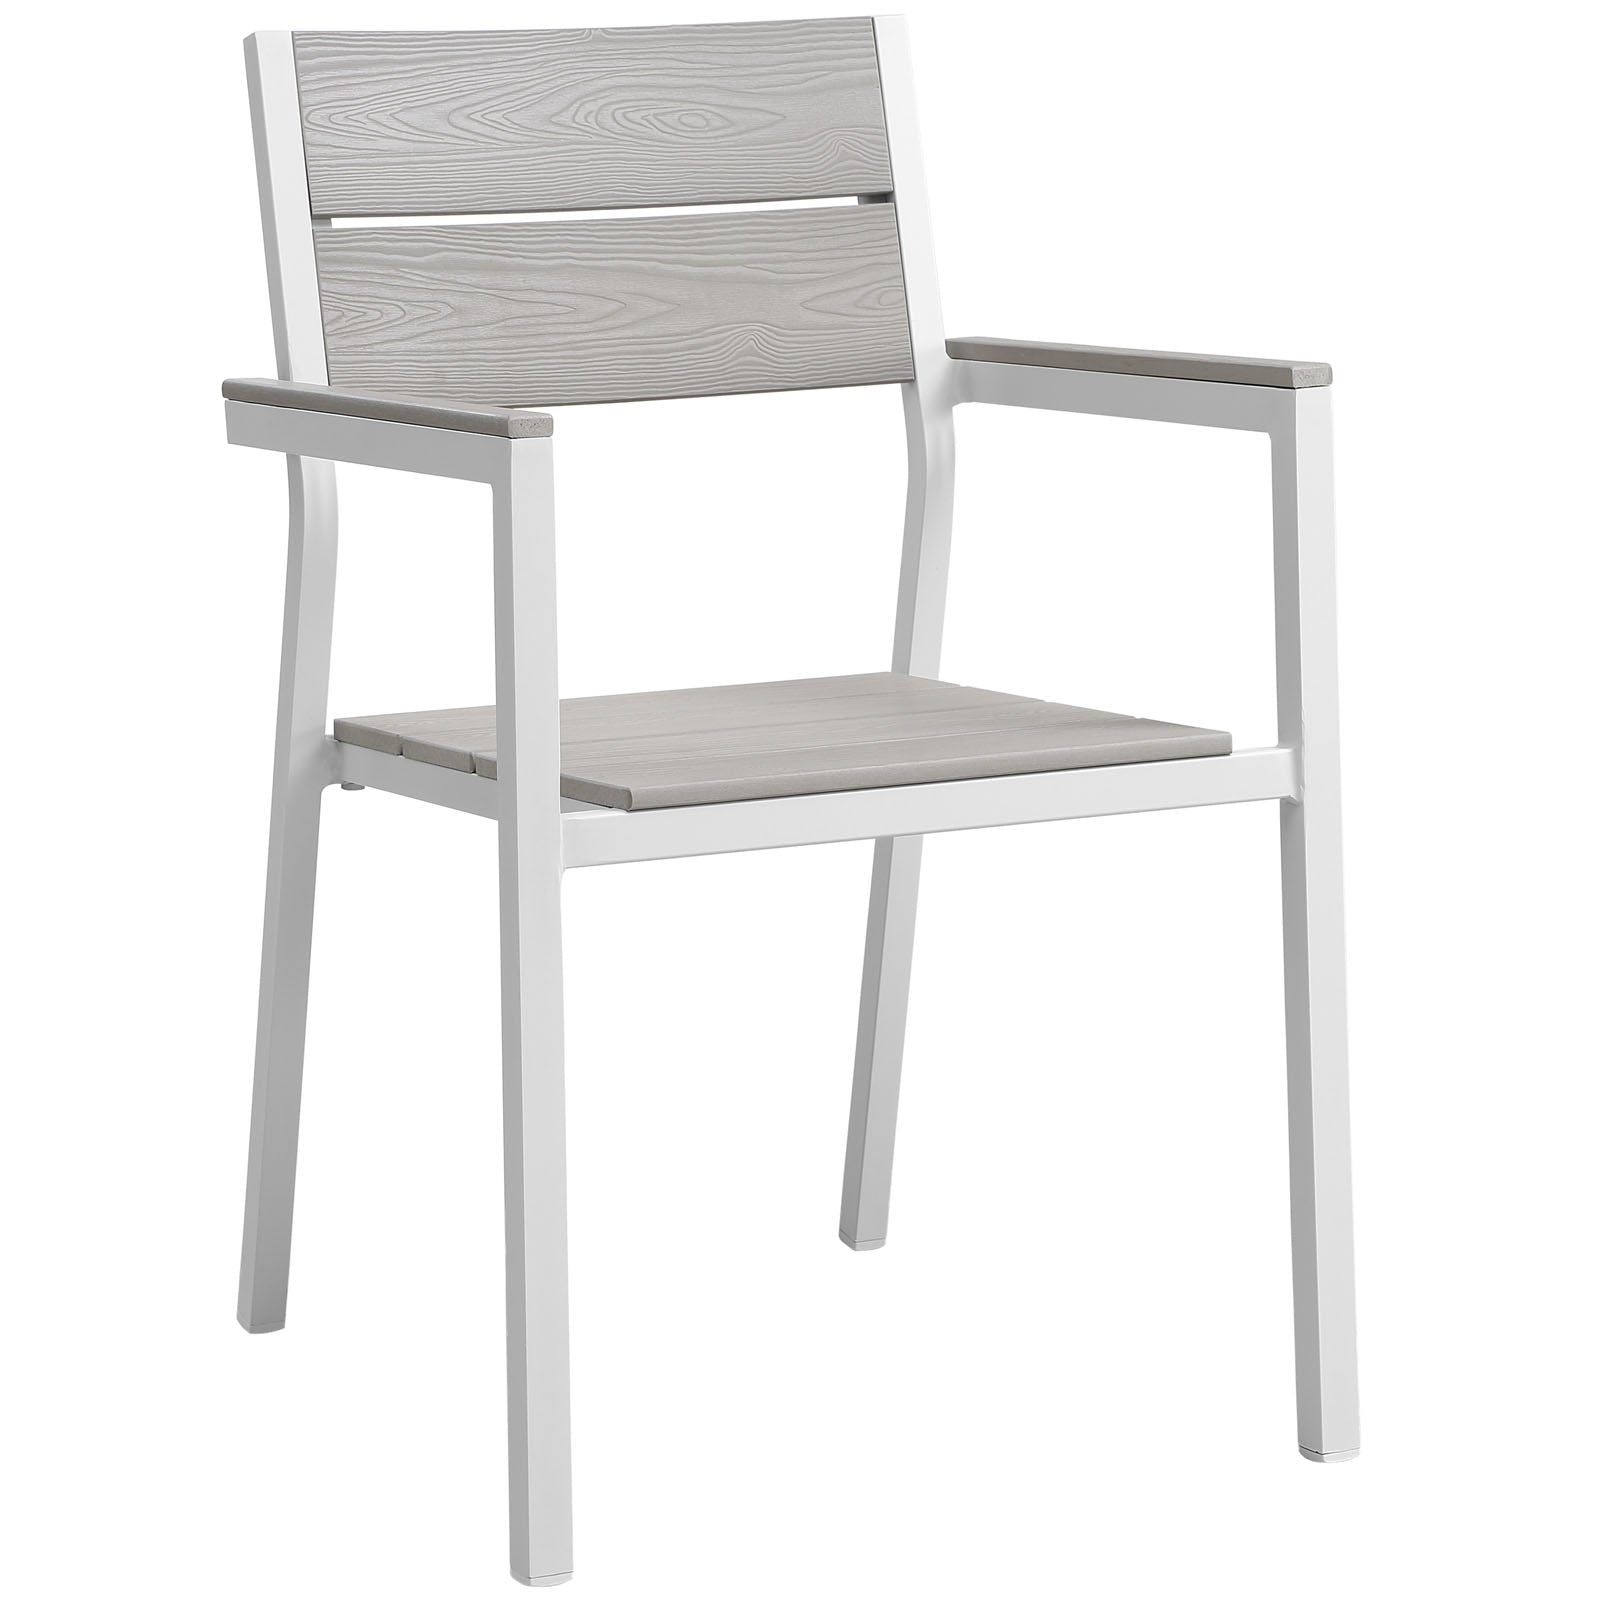 Modway Outdoor Dining Sets - Maine 3 Piece Outdoor Patio Dining Set White Light Gray